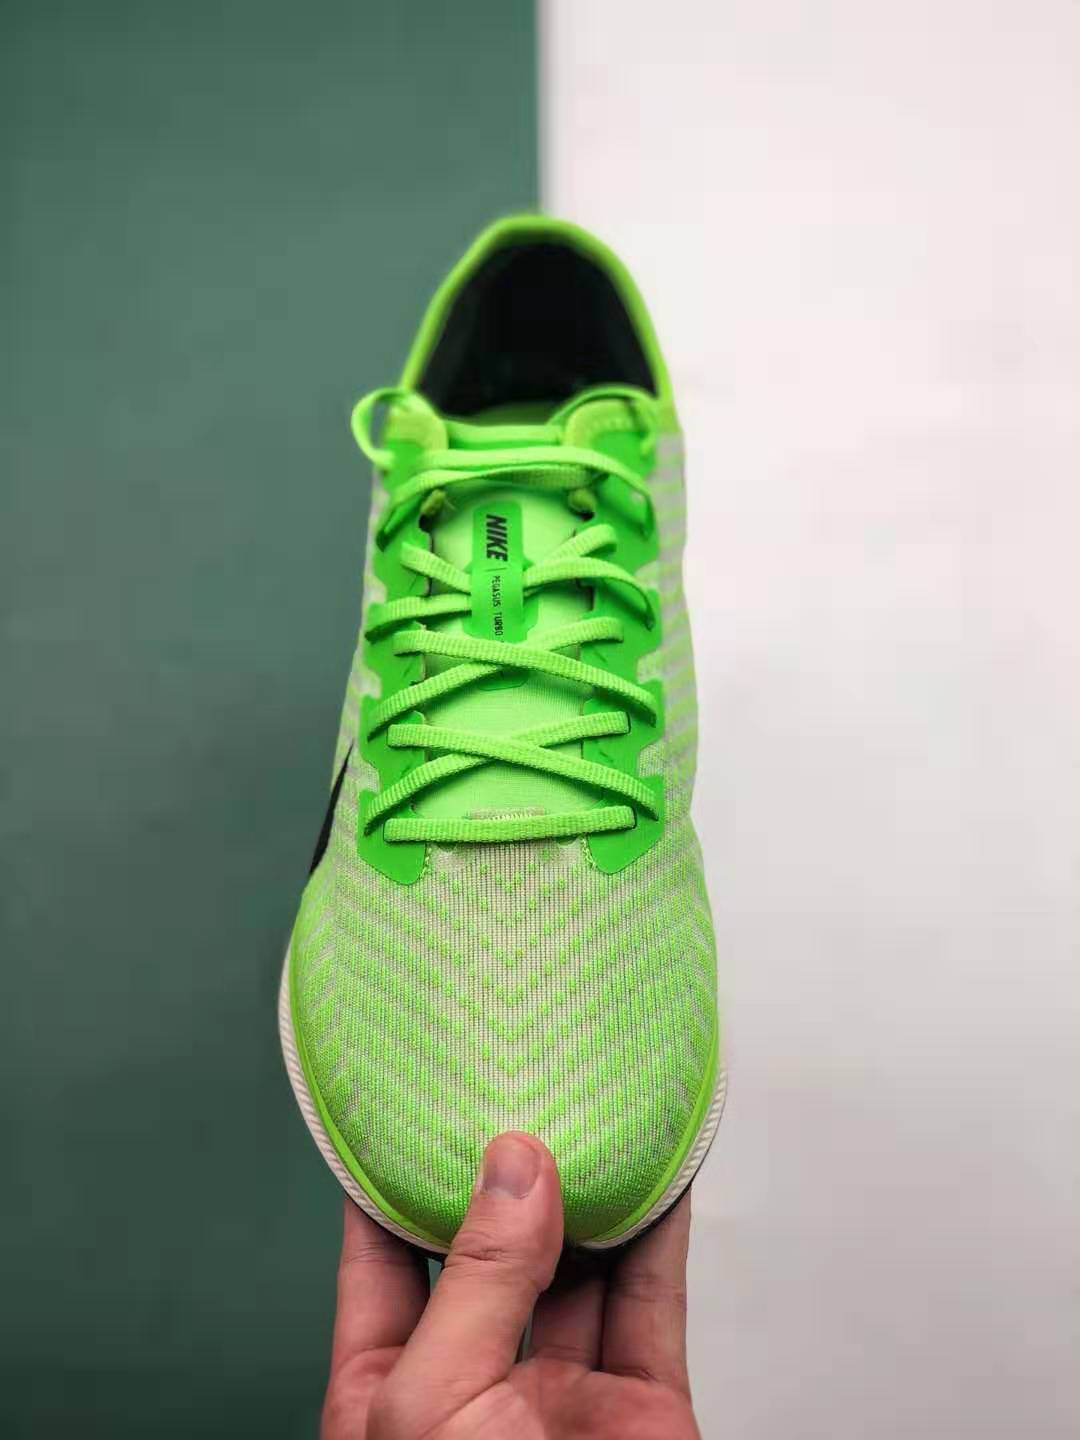 Nike Zoom Pegasus Turbo 2 Electric Green Running Shoe AT2863 300 - Lightweight and Responsive | Shop Now!